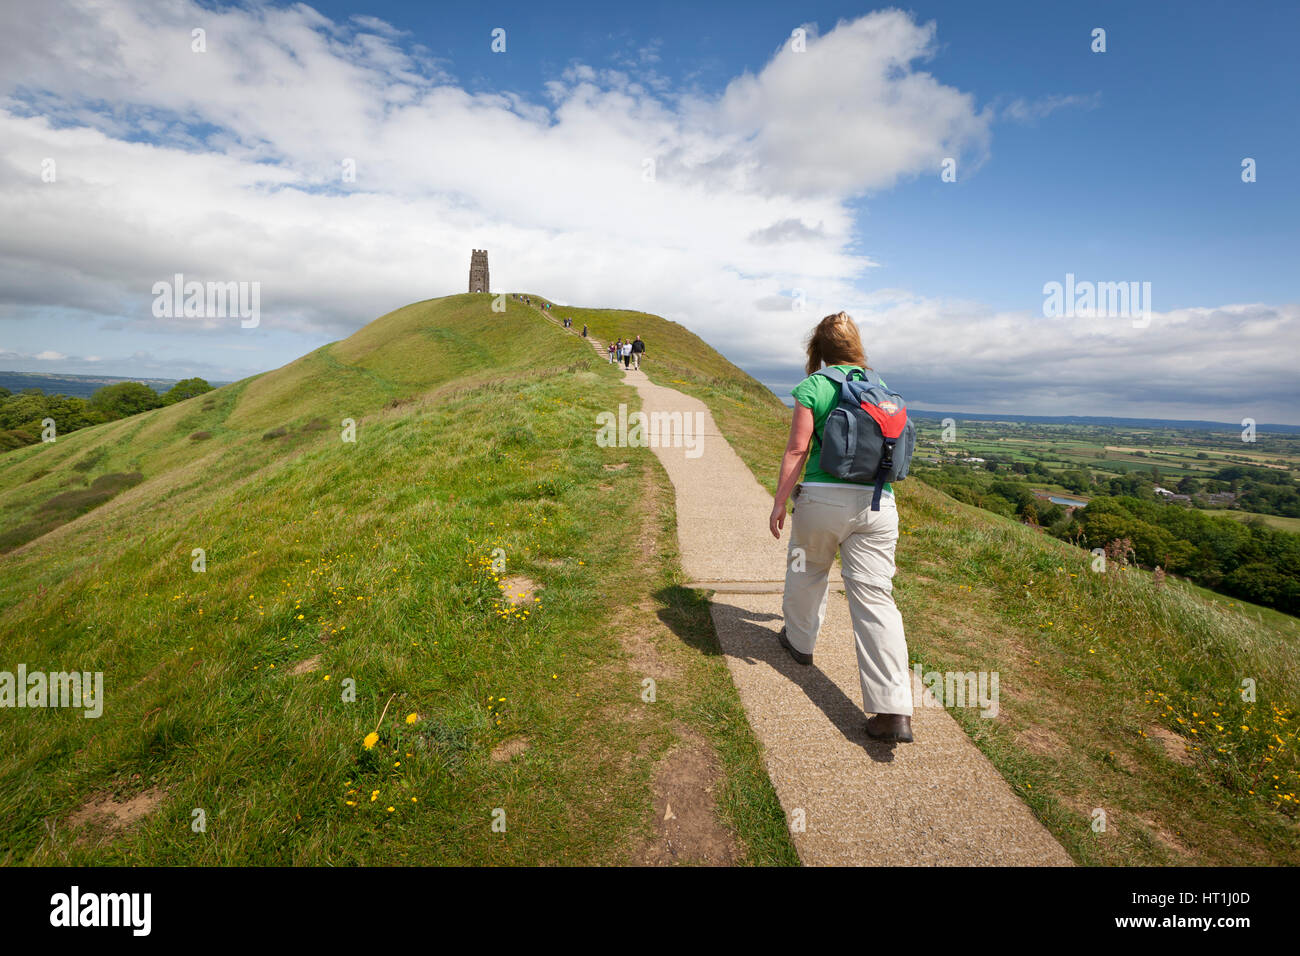 Glastonbury, United Kingdom - May 29, 2011: Rear view of a woman walking up the path on Glastonbury Tor towards St Michael's Tower. The trees and fiel Stock Photo